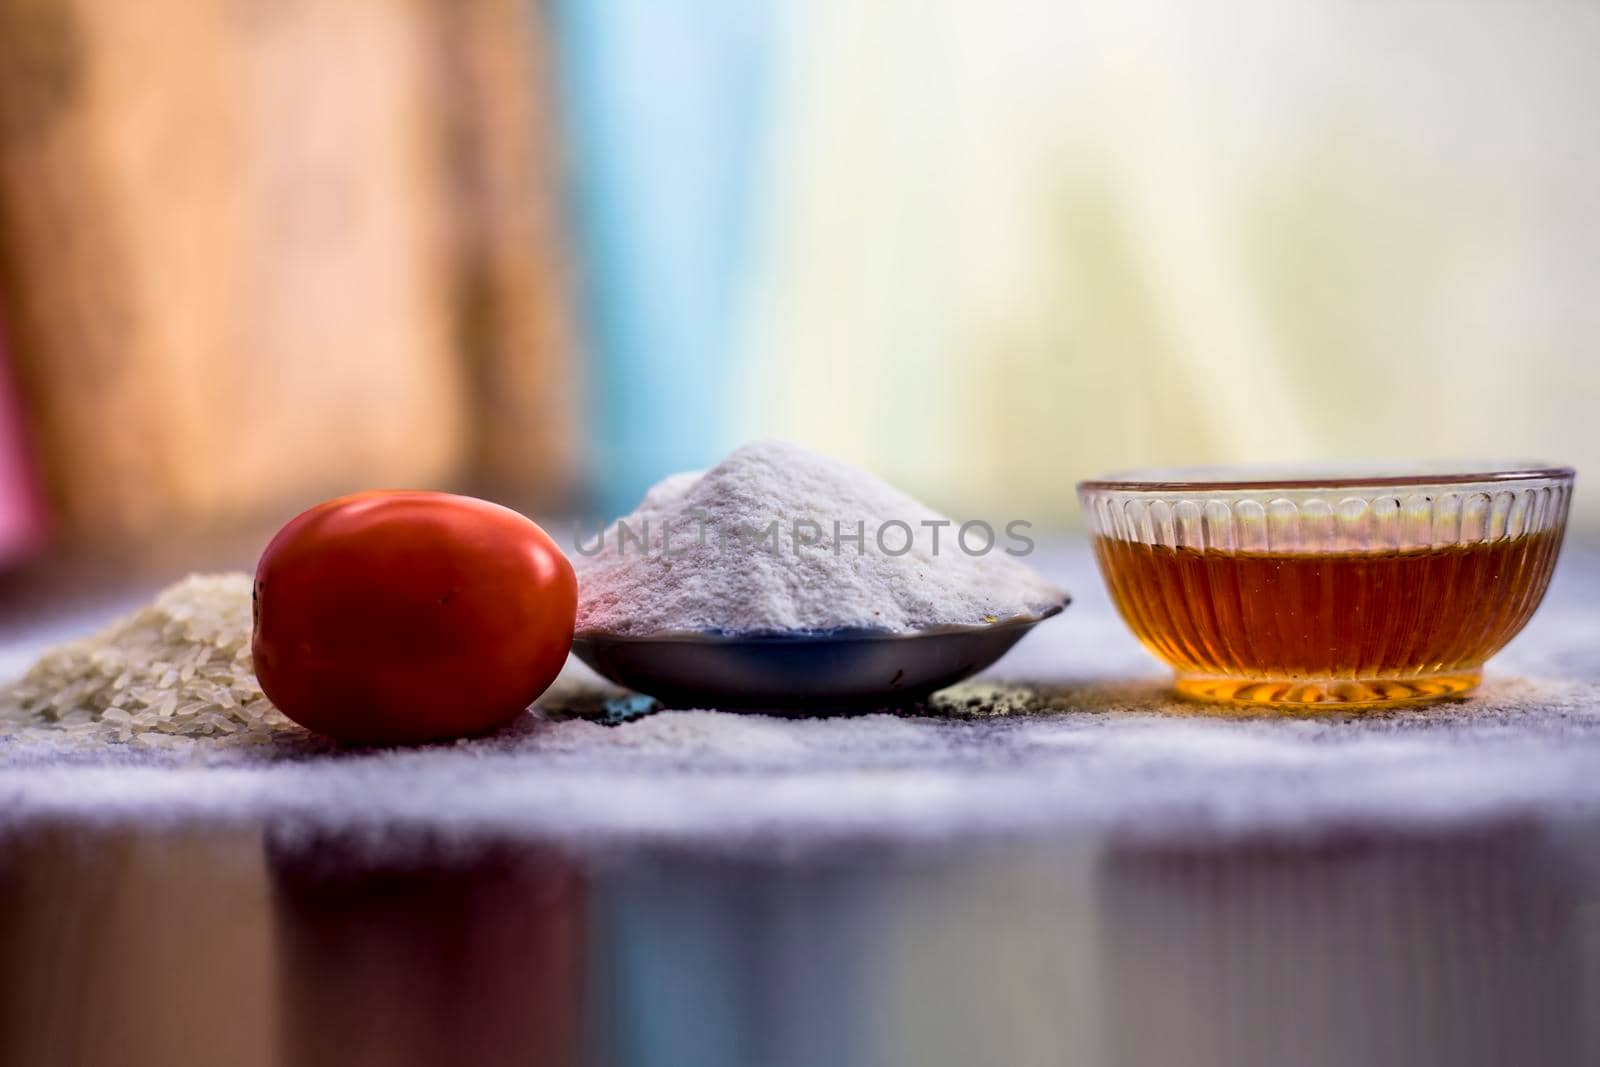 Face pack of rice flour and tomato in a glass bowl on wooden surface along with raw rice,tomato and rice flour.Used for the treatment of oily skin.